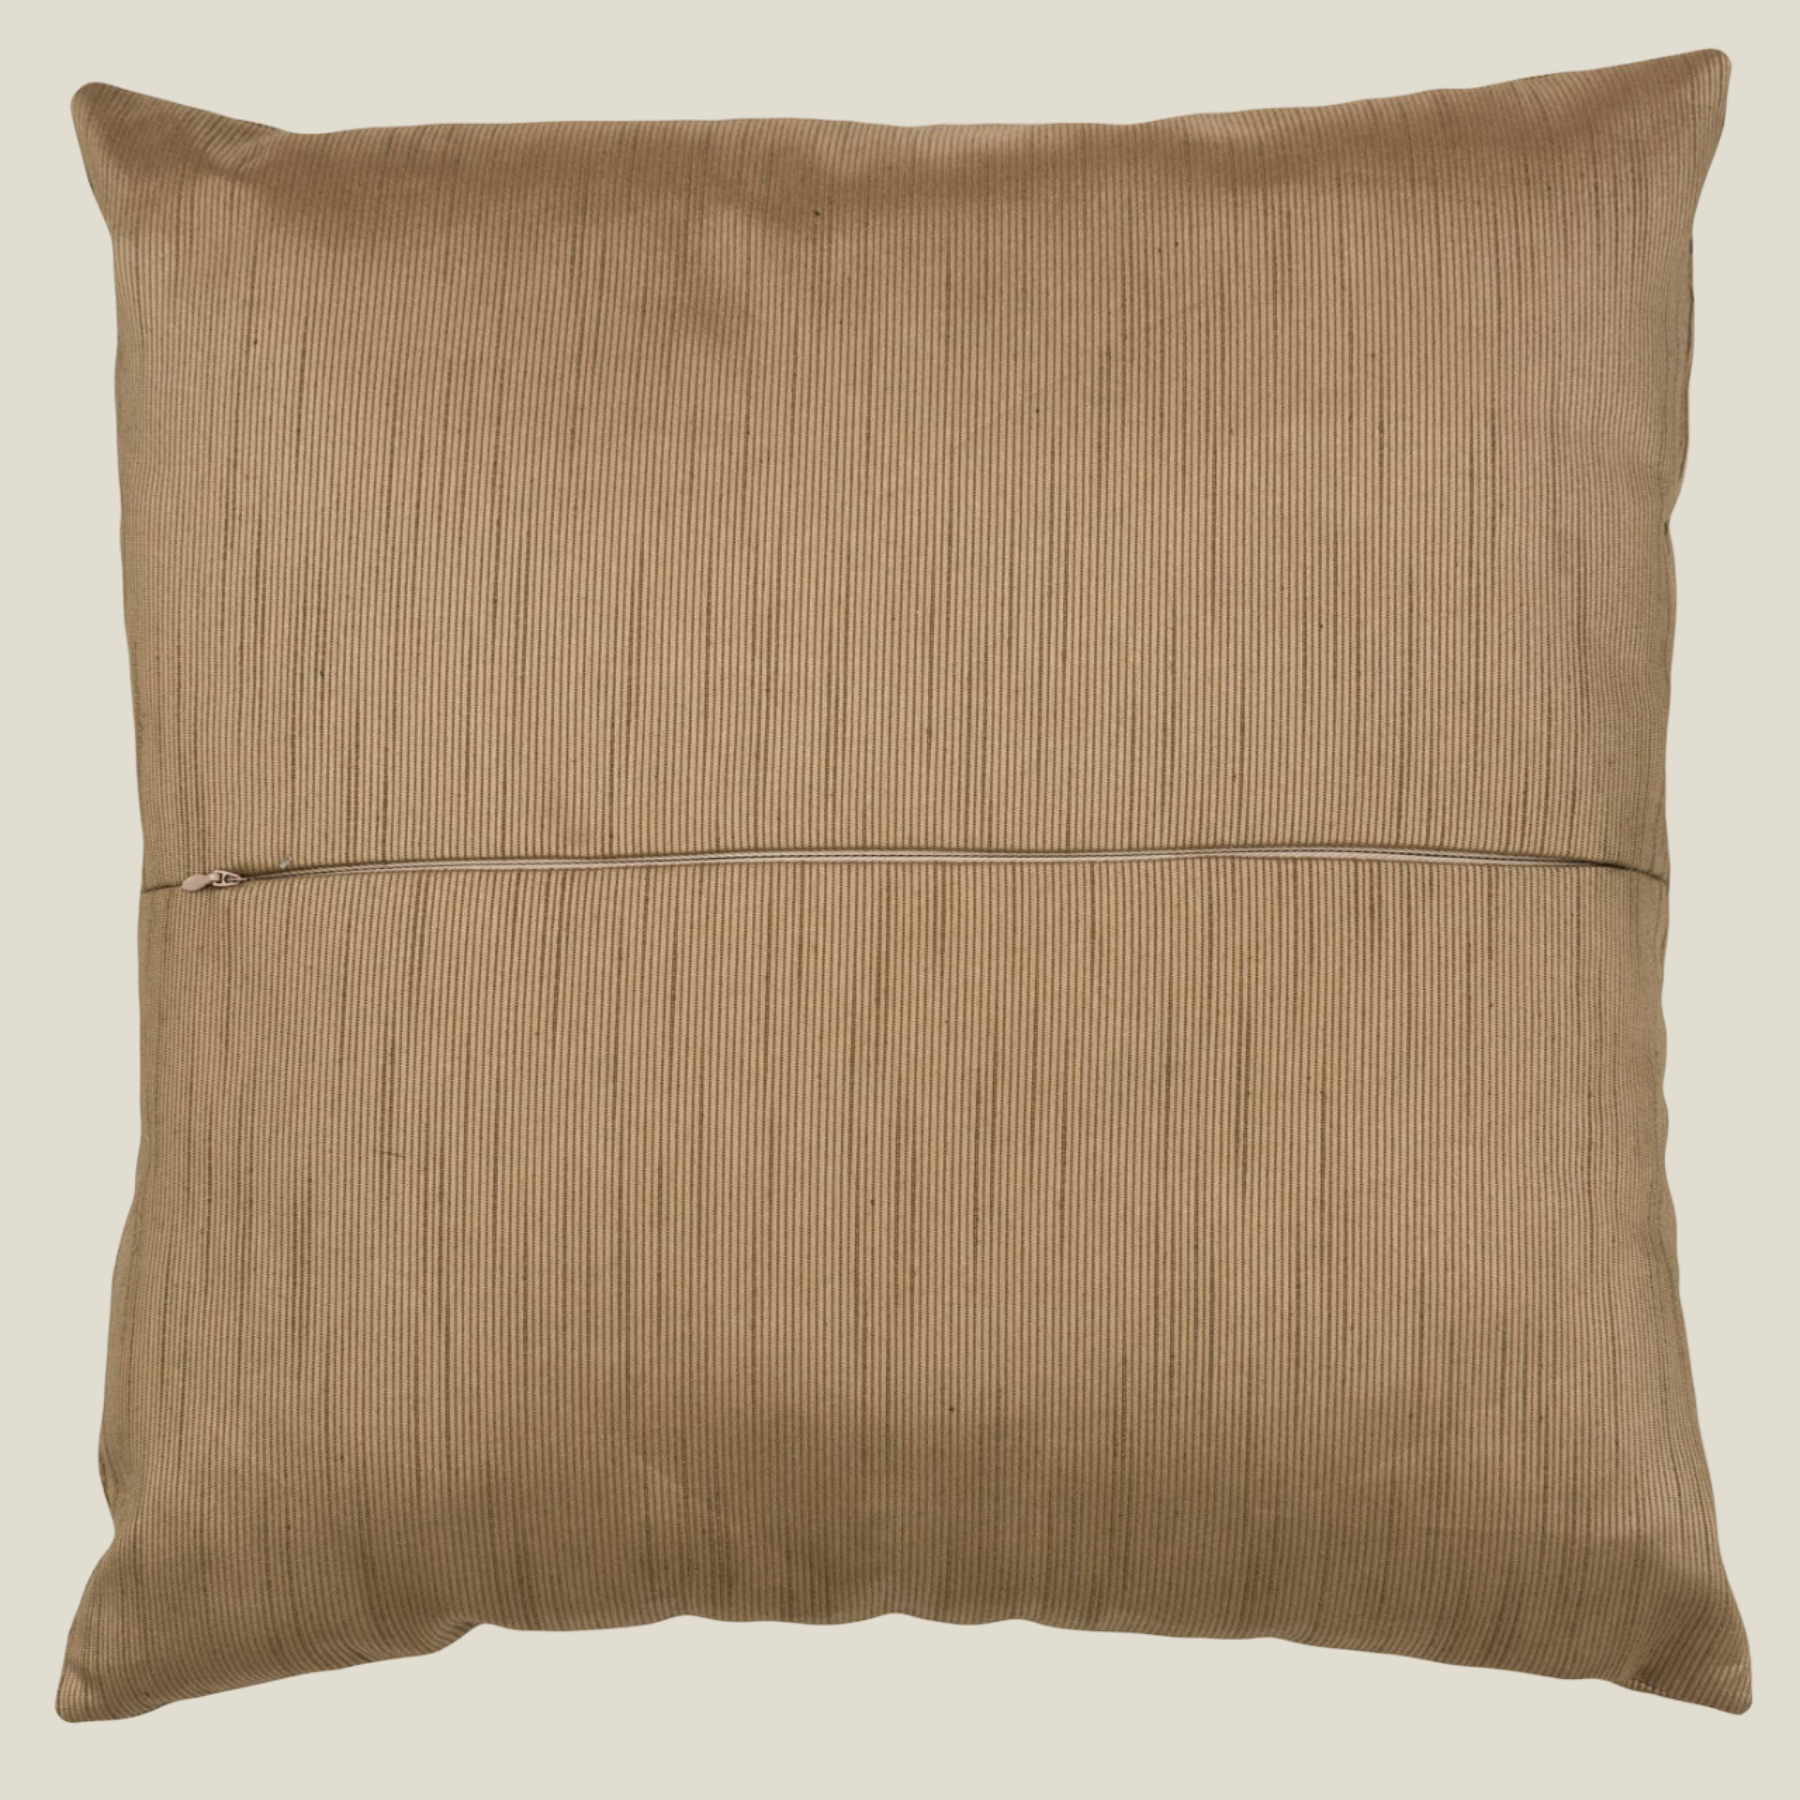 The Luxelife Brown Floral Fully Embroidered Cushion Cover